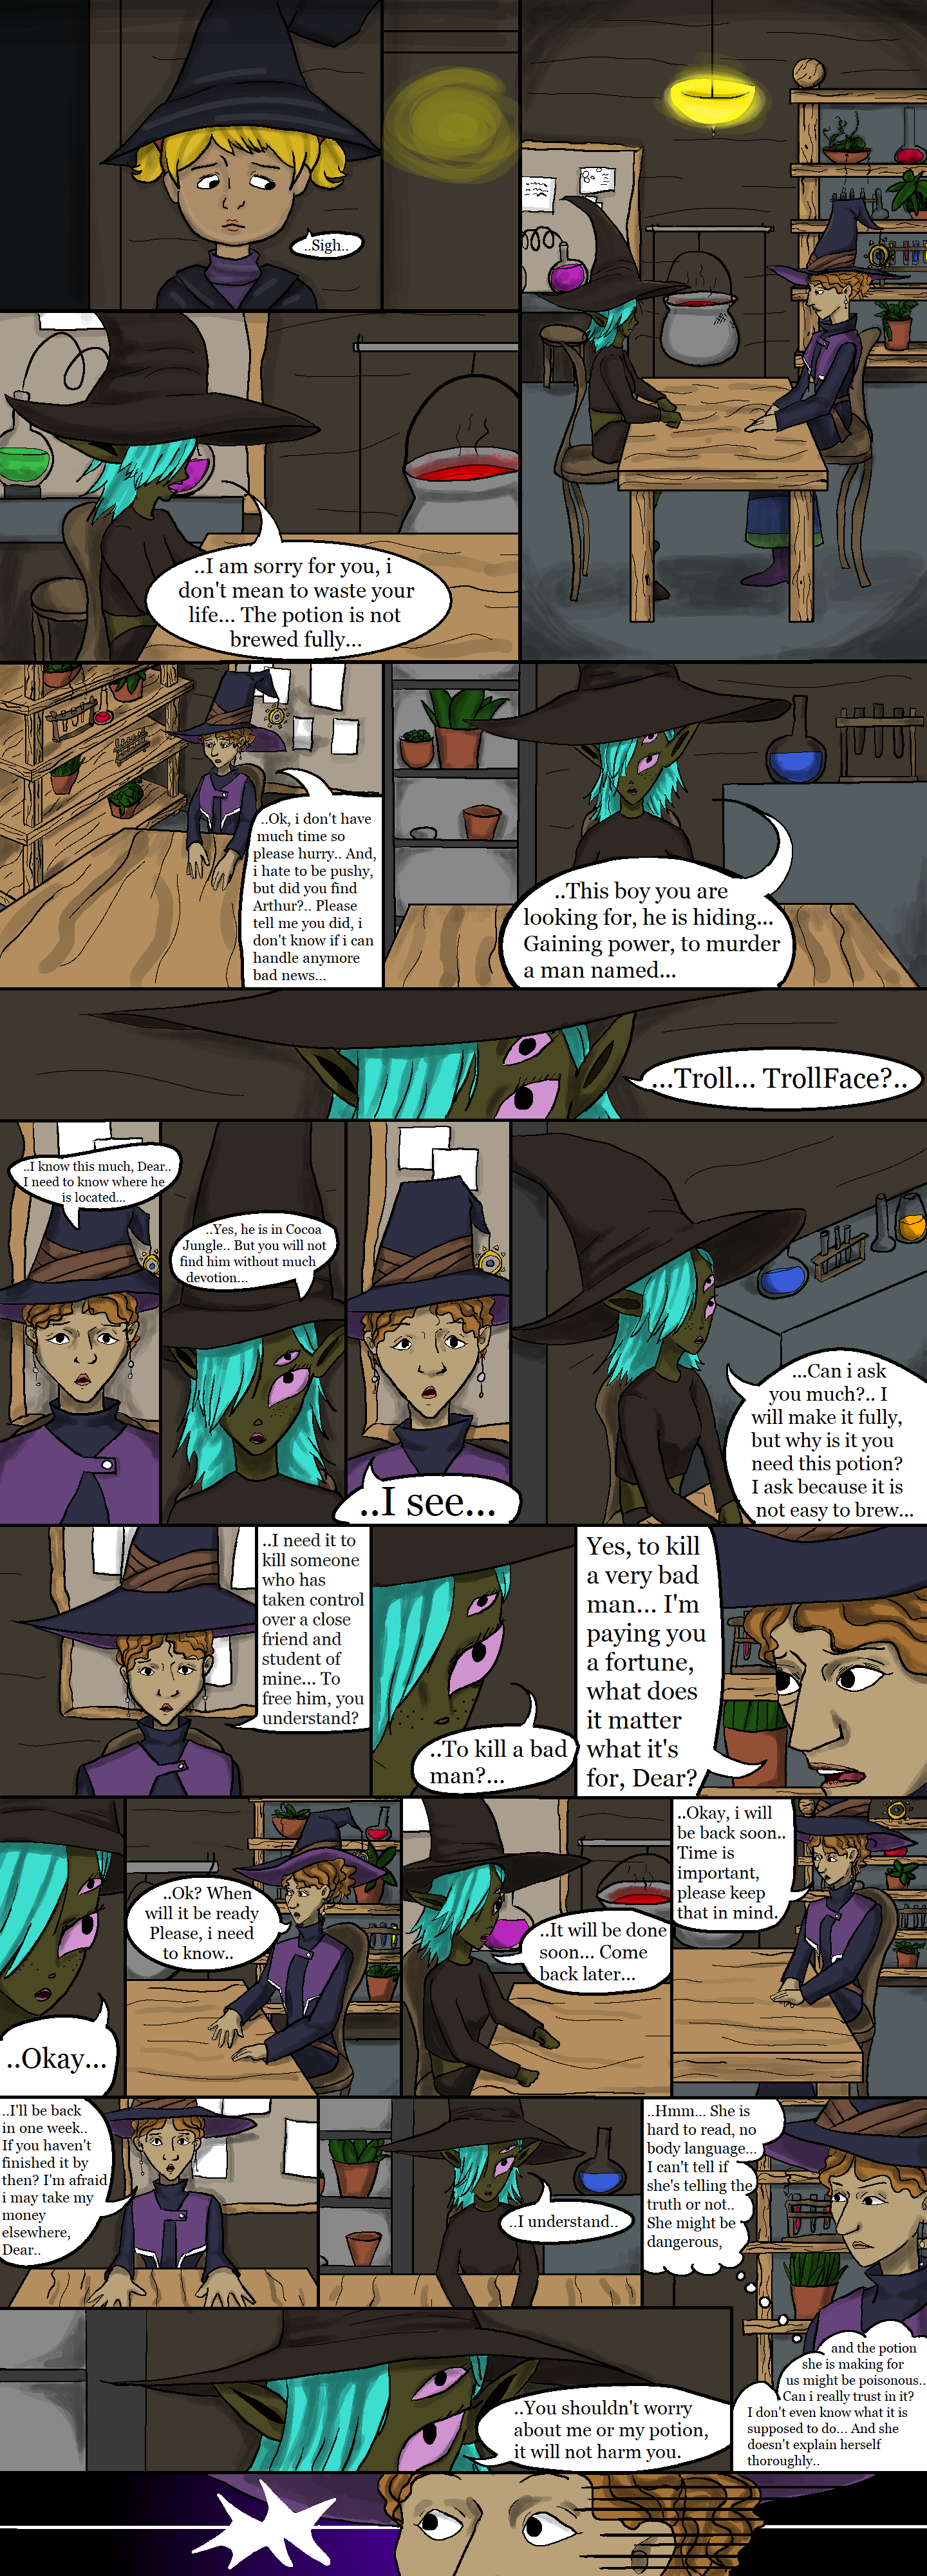 ch25/pg5.png. If you're seeing this, enable images. Or, perhaps we have a website issue. Try refreshing, if unsuccessful email c@commodorian.org with a detailed description of how you got here.